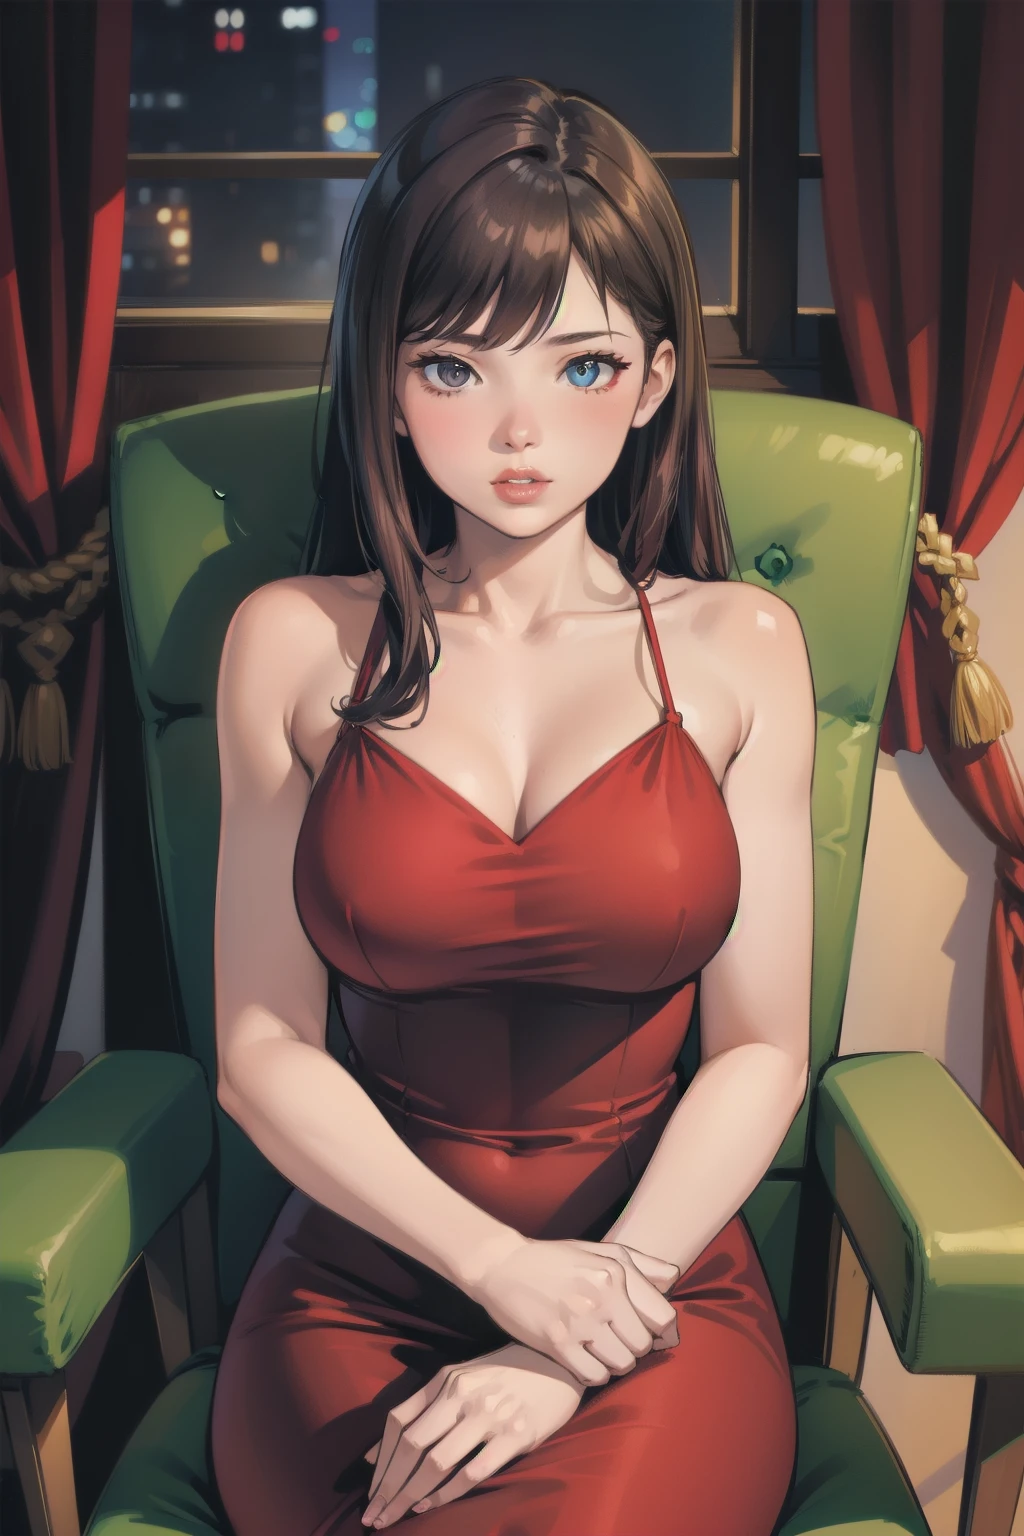 Young セクシー woman wearing a red dress sitting on a chair, 薄暗い照明, セクシー, 熱い, 好色な